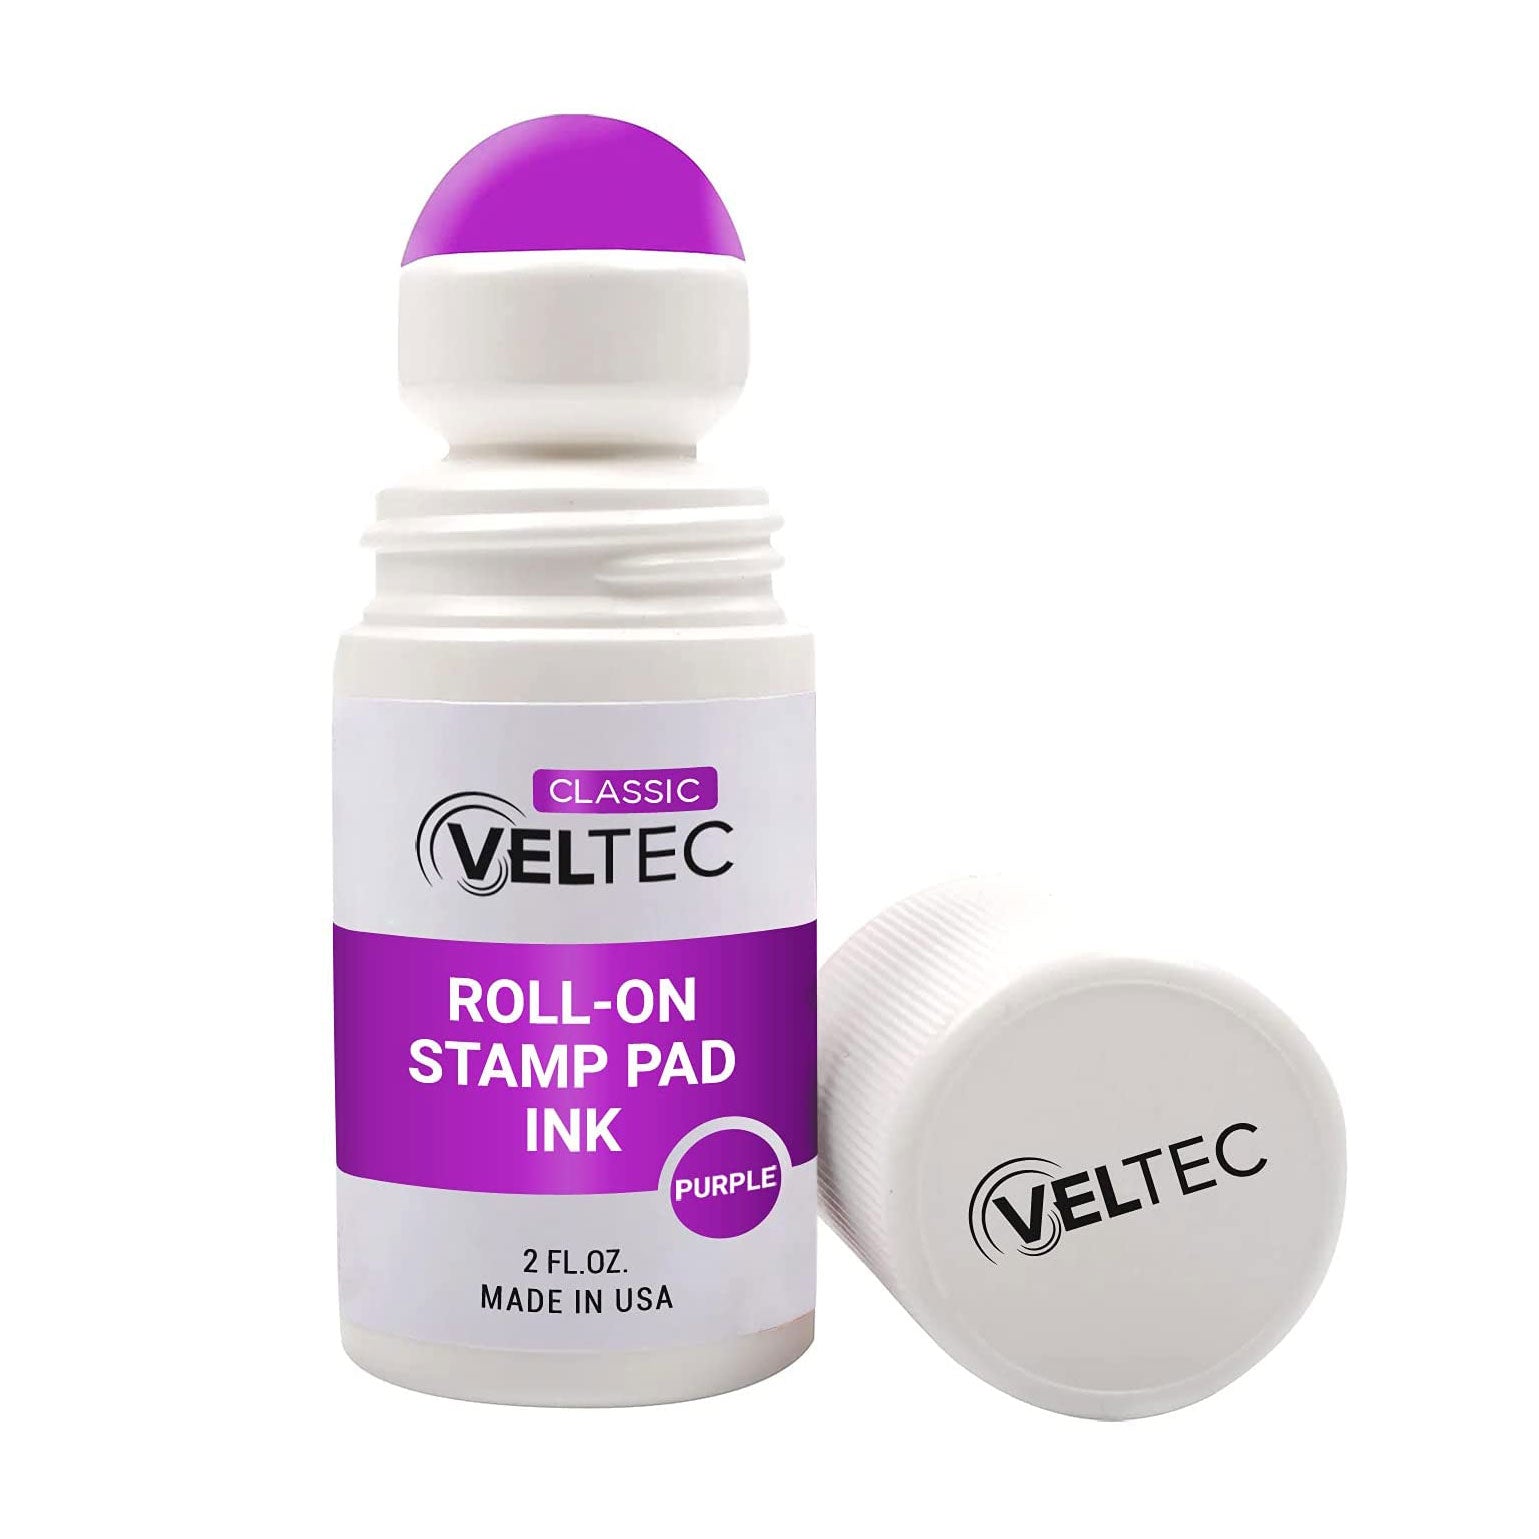 Premium Stamp Ink |Roll-on Stamp Ink Refill Great for Ink Refill. Apply to Ink for Stamps with Roller Ball 2 oz. Red Ink